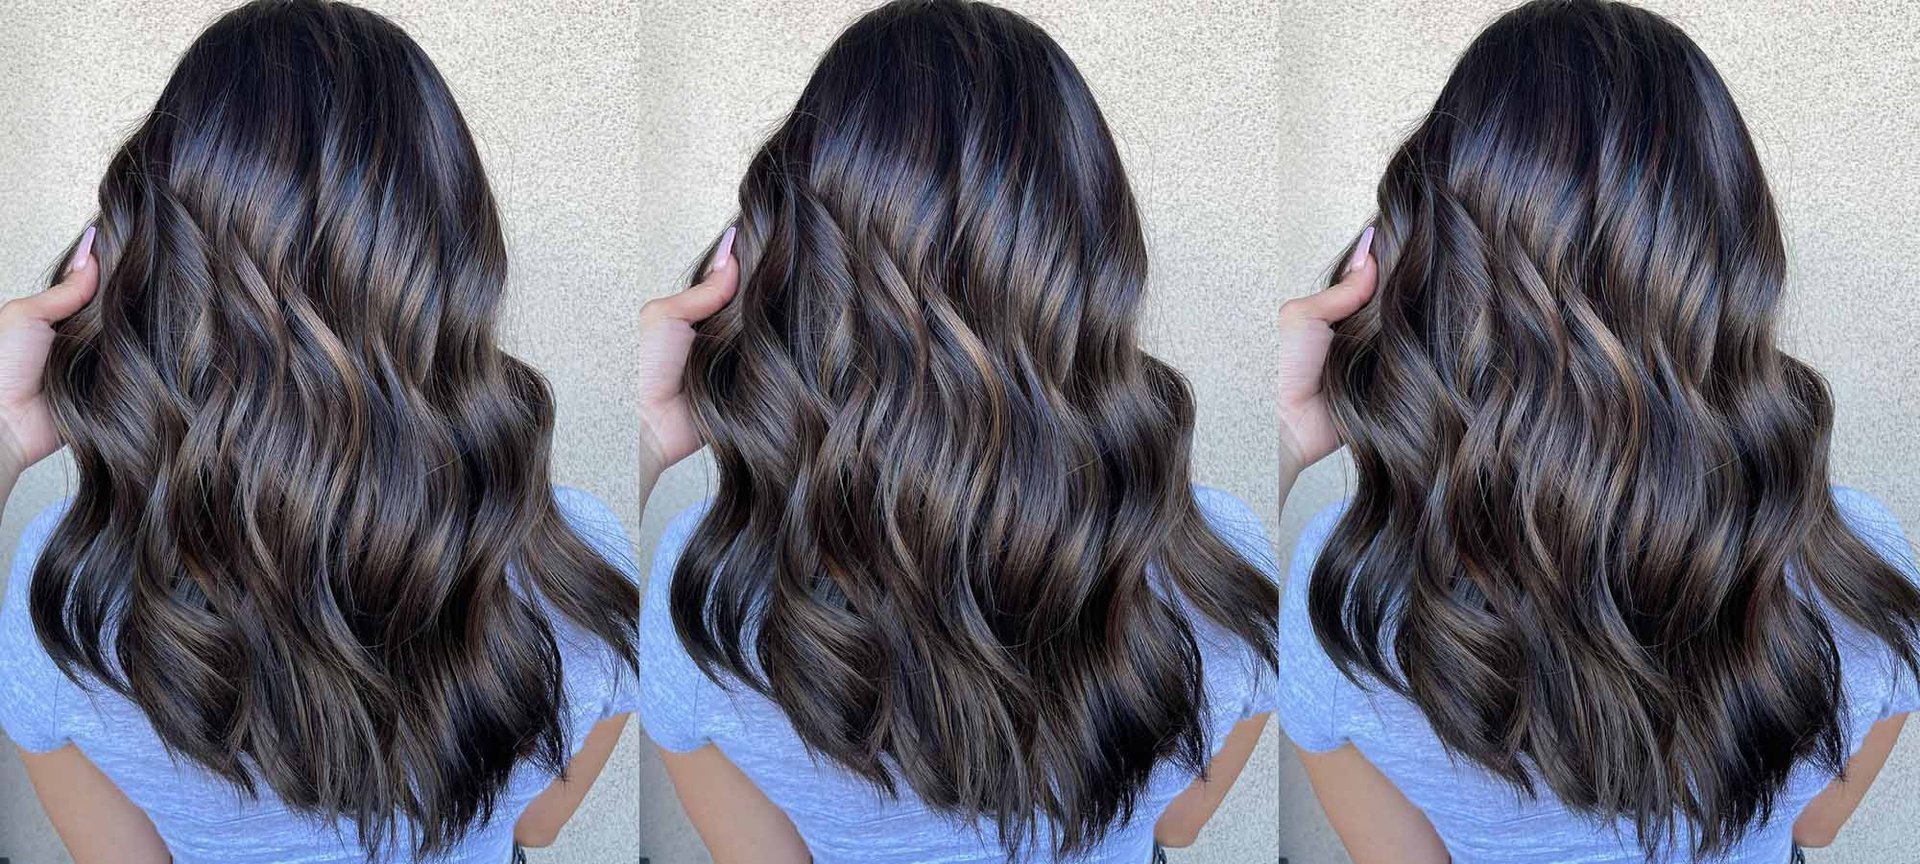 What is the different between warm and cool tone hair - MEGAN PIRROCCO  HEALTHY HAIR SPECIALIST